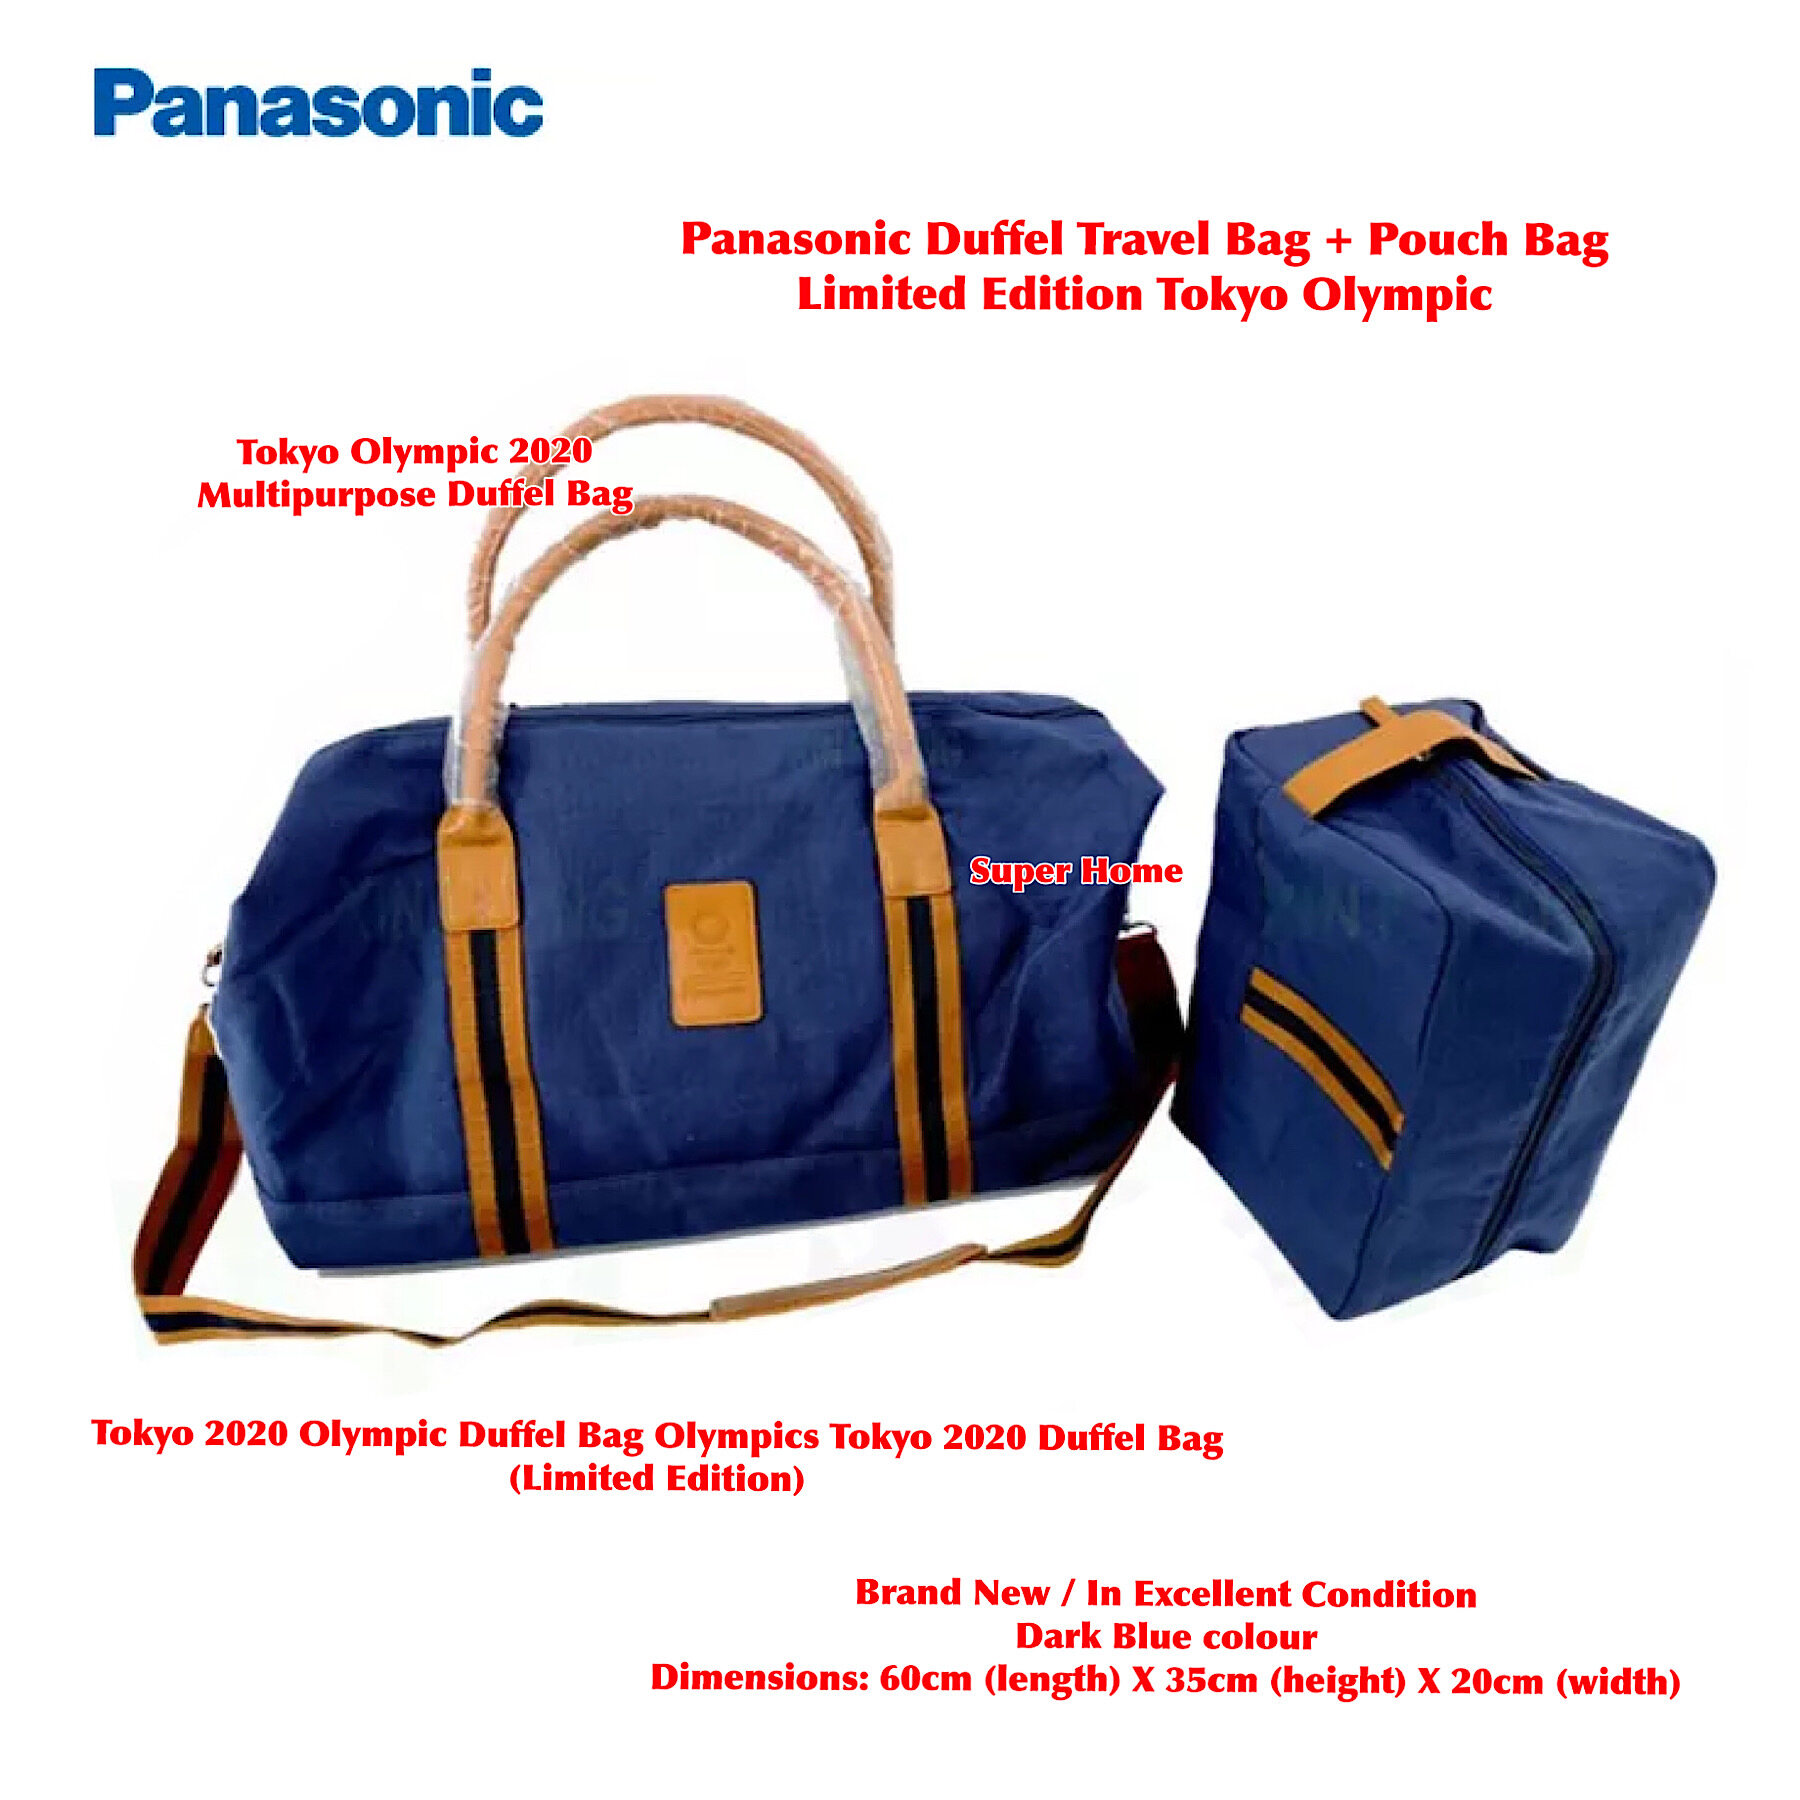 Panasonic Duffel Travel Bag Limited Edition Tokyo Olympic + Pouch Bag